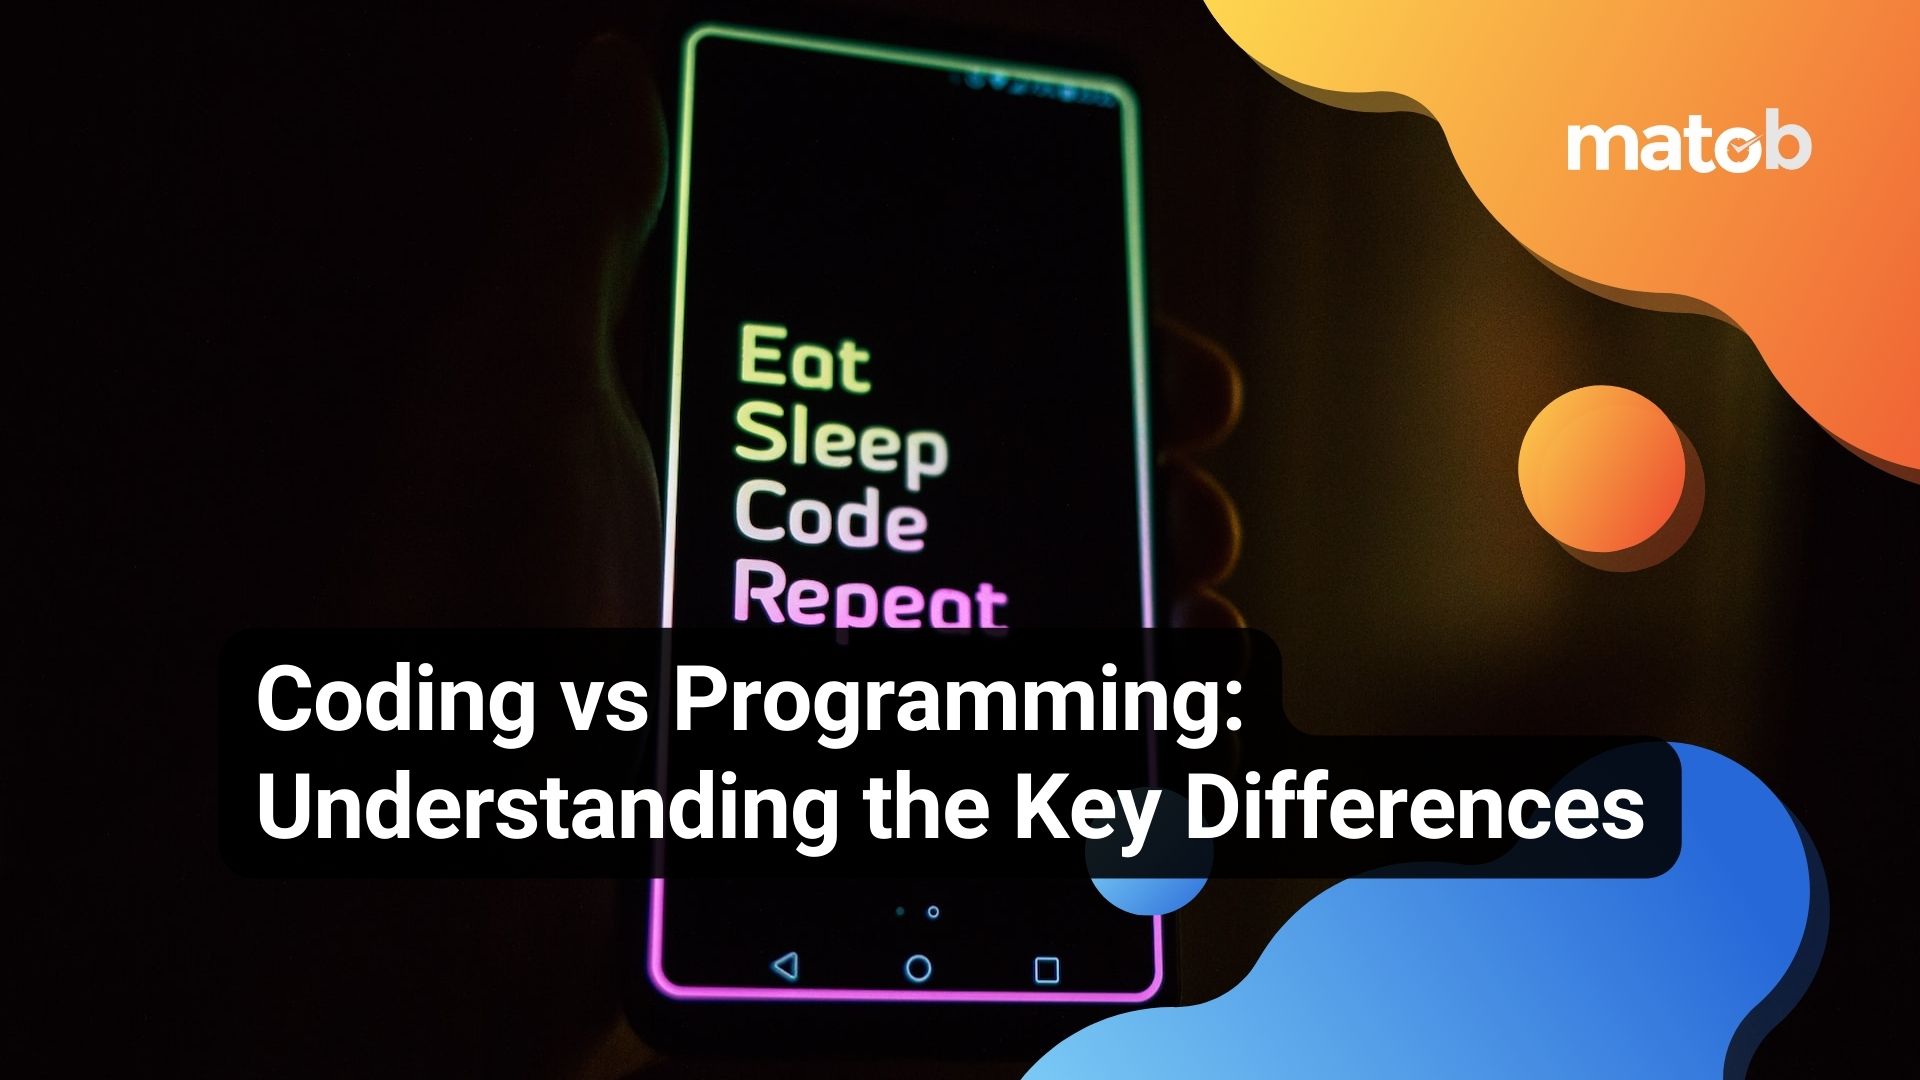 Coding and Programming: Understanding the Key Differences